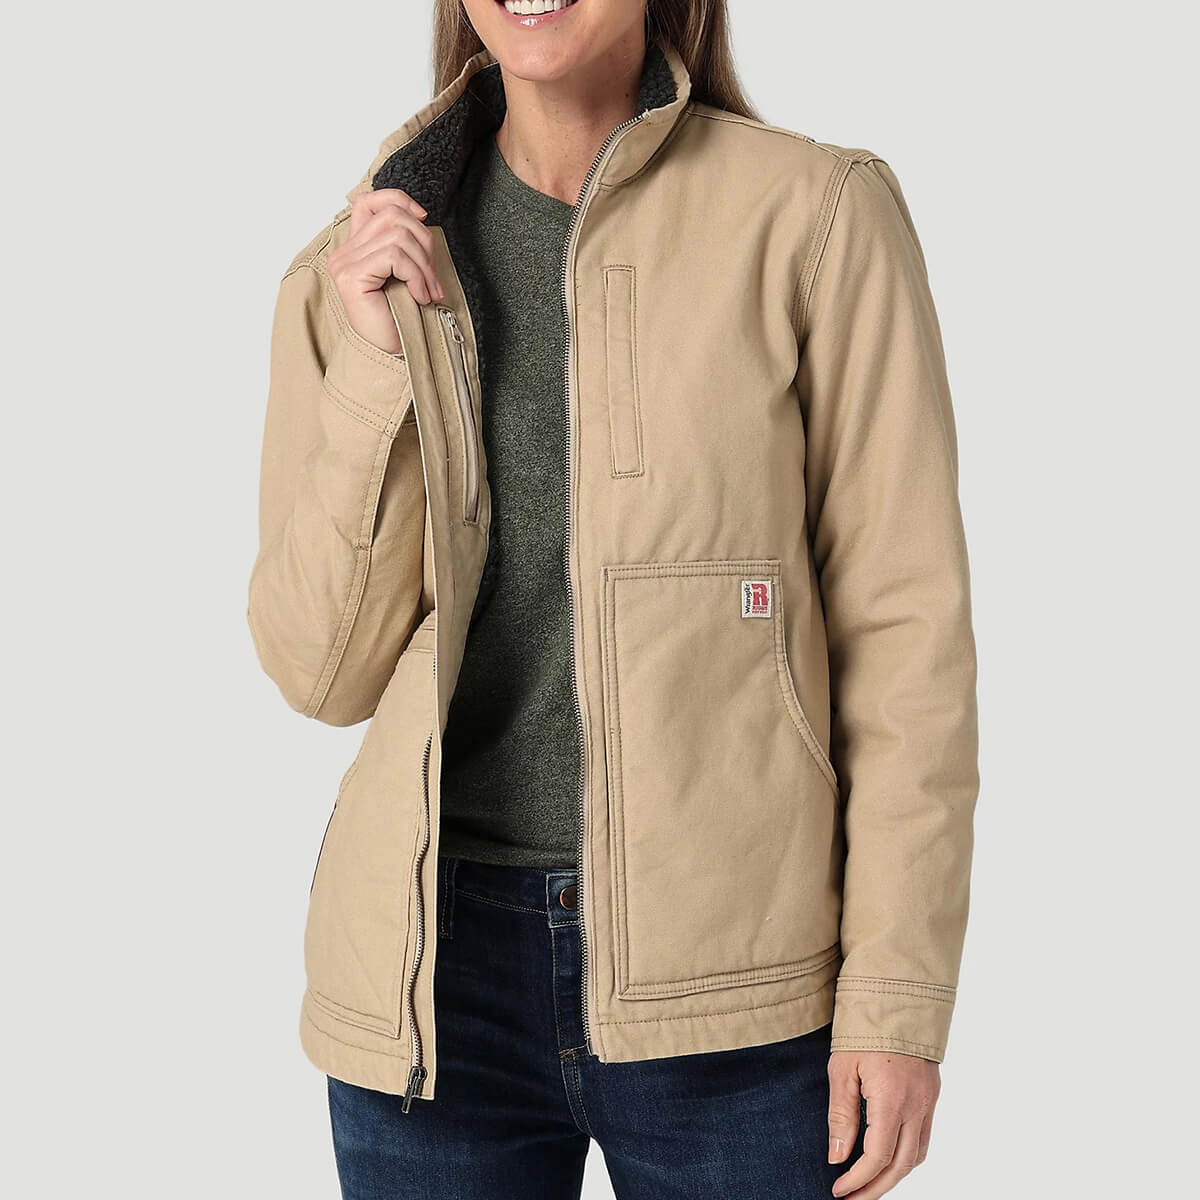 Womens Riggs Tough Layers Sherpa Lined Canvas Jacket - Golden Khaki